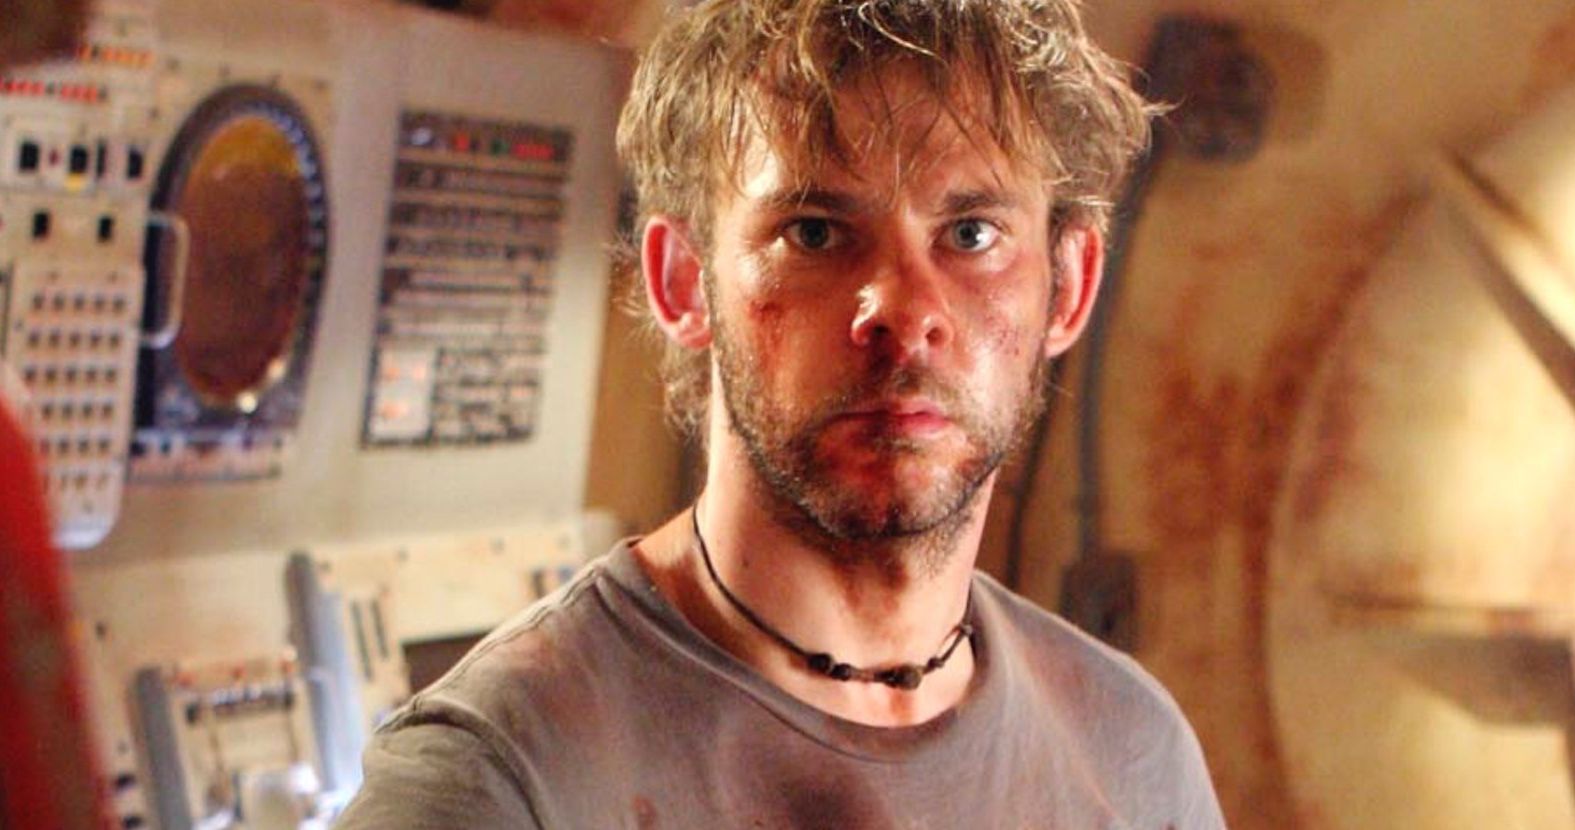 First Look at Dominic Monaghan's Character in The Rise of Skywalker